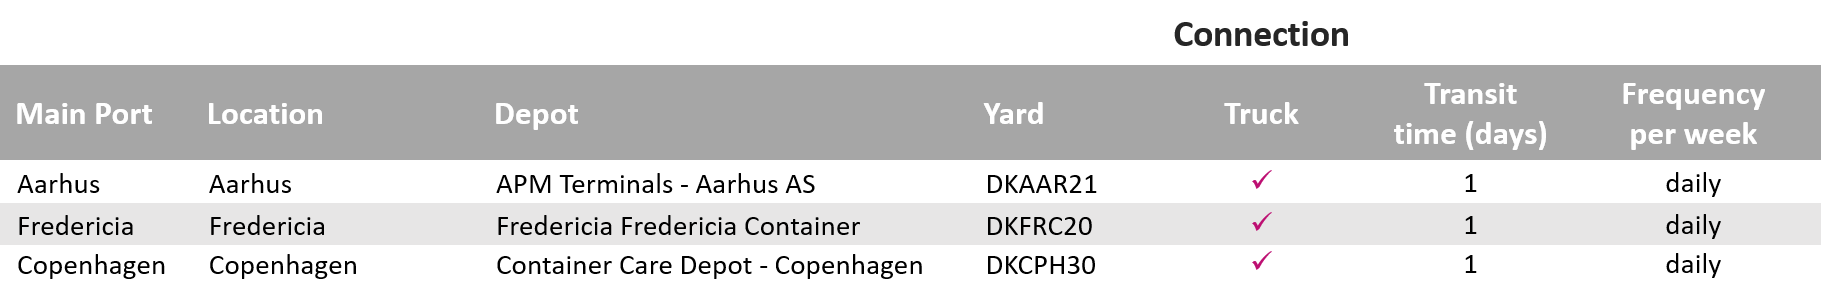 Carrier haulage depots and transit times_Denmark